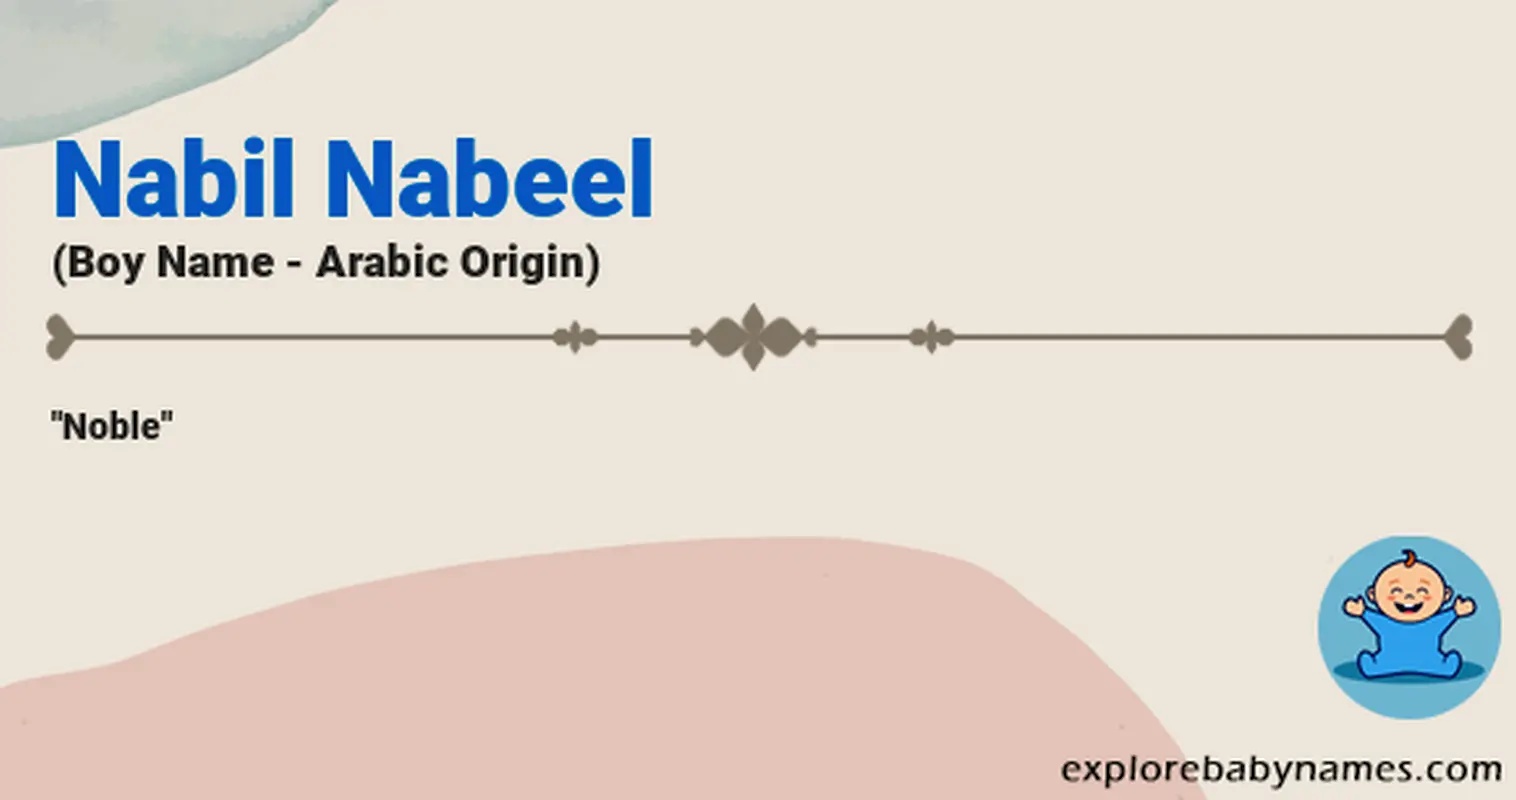 Meaning of Nabil Nabeel